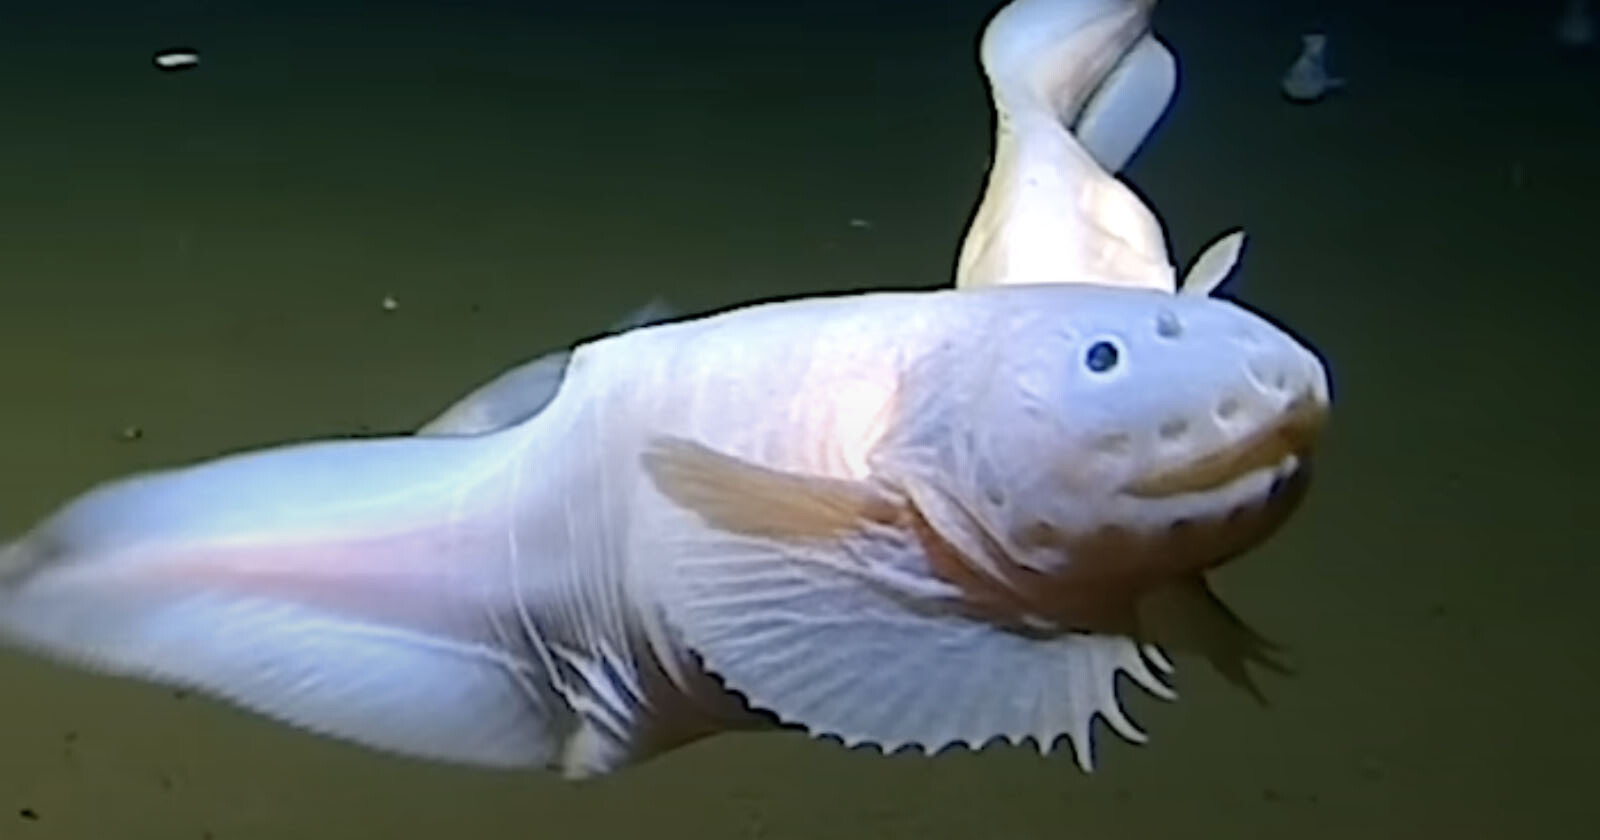 Worlds Deepest Fish Caught on Camera for the First Time